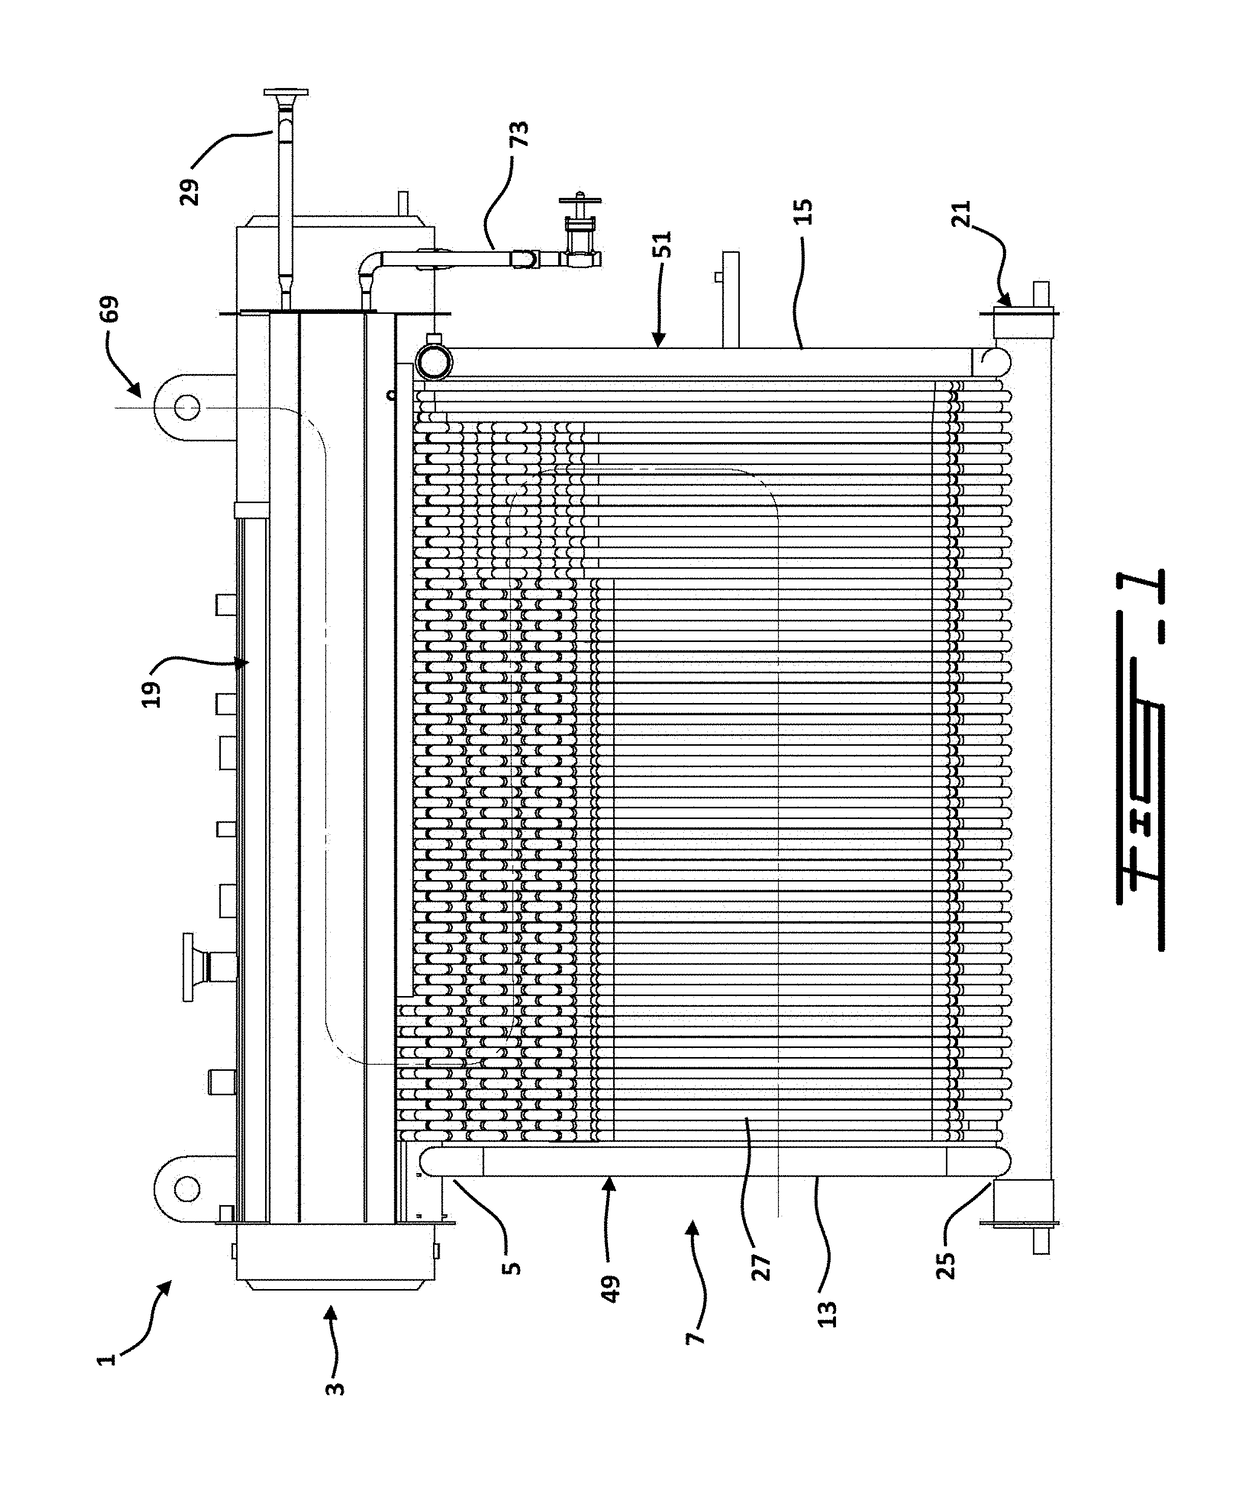 Boiler system comprising an integrated economizer